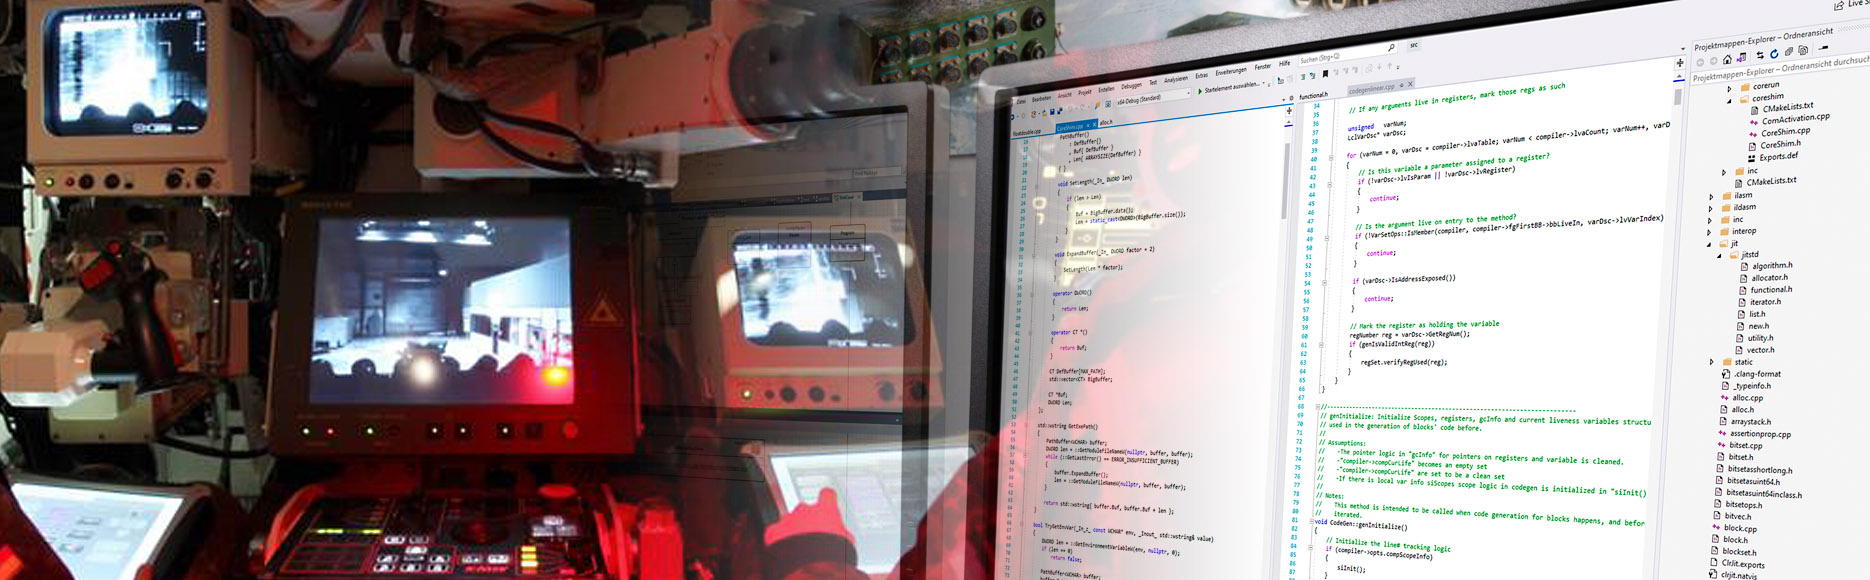 A soldier operates a device and computer monitor in the PUMA with lines of code